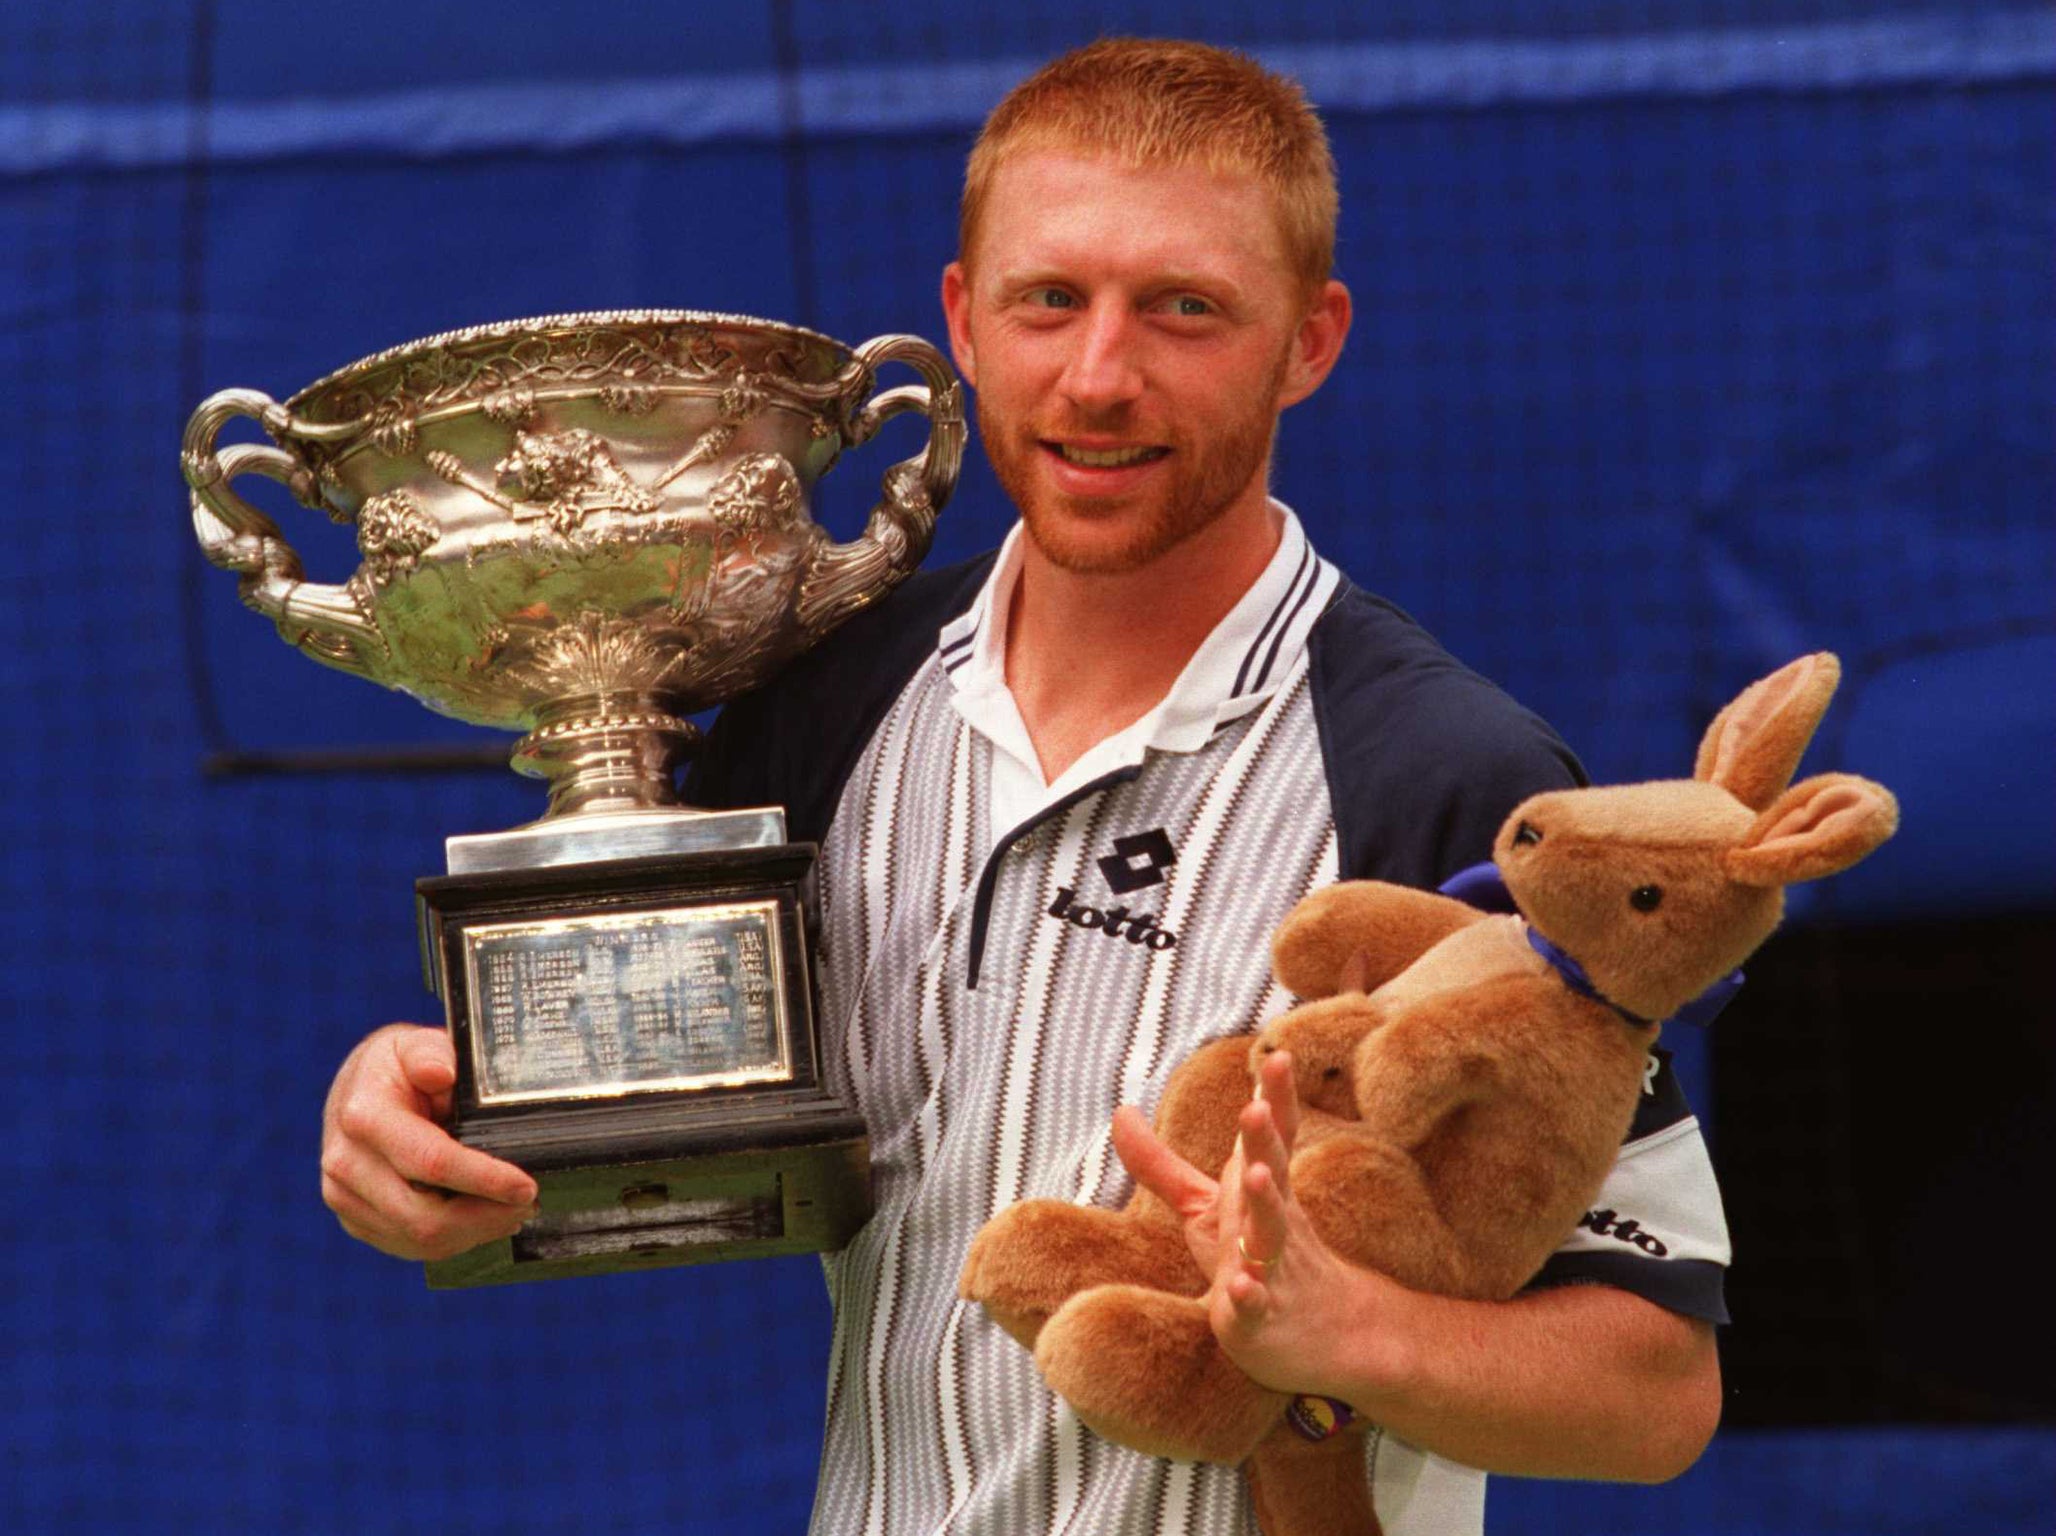 Boris Becker won the Australian Open for a second time in 1996